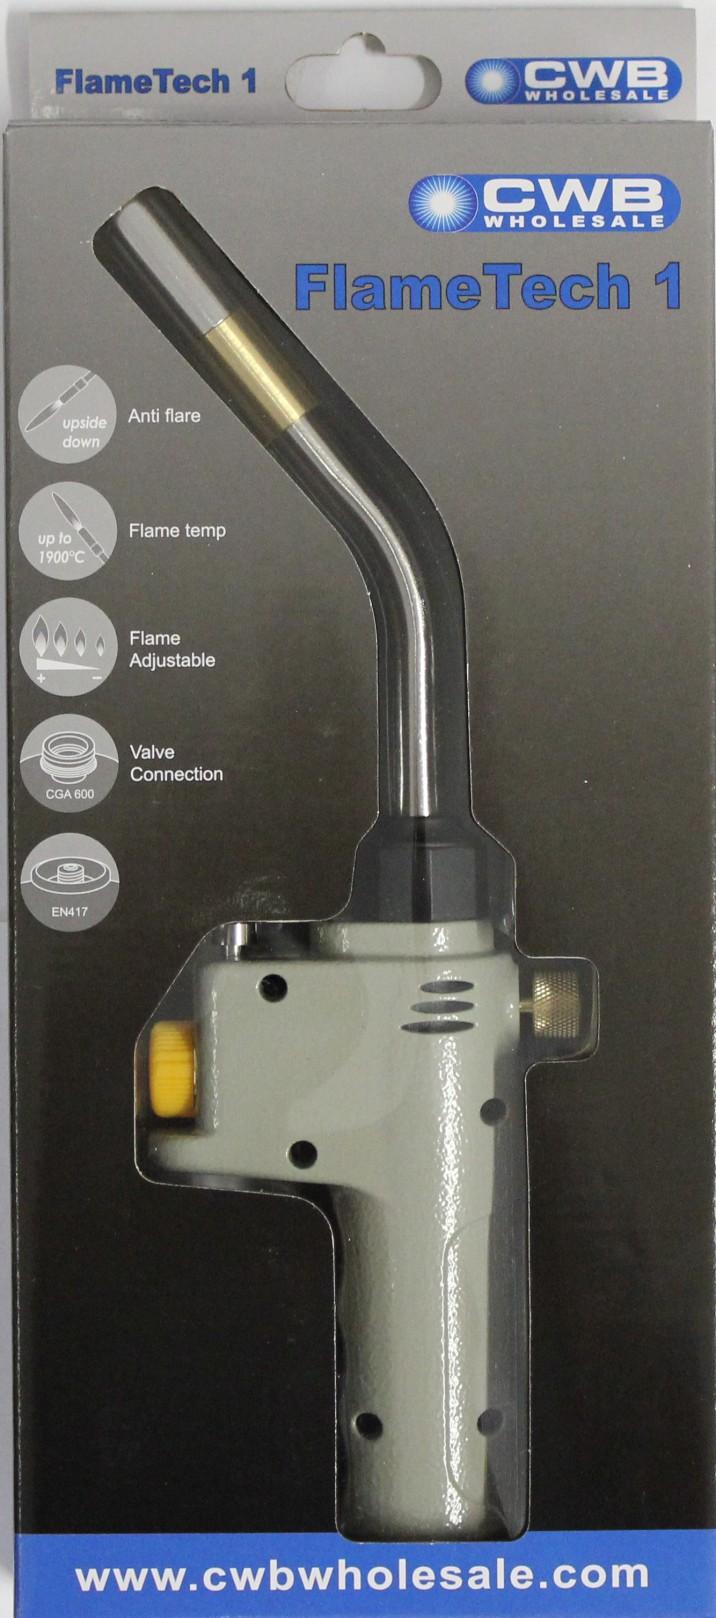 BRAZING EQUIPMENT Self Ignite Torch. The torch has been manufactured from a cast aluminium body rather than the traditional plastic type making it more difficult to damage.